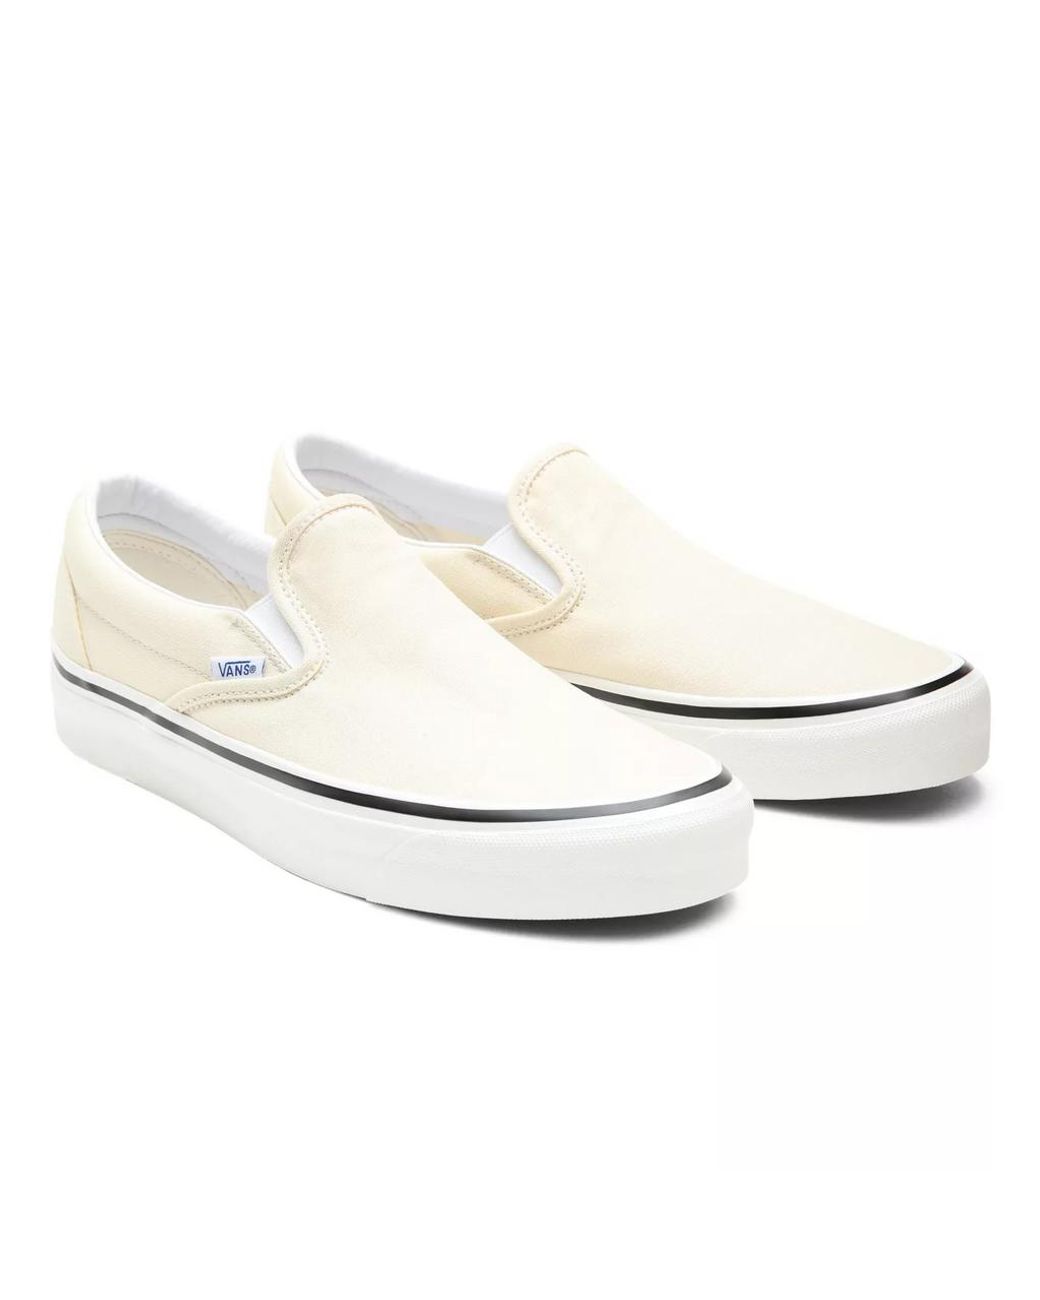 Vans Canvas Anaheim Factory Classic Slip On 98 Dx Og White Trainers - Lyst